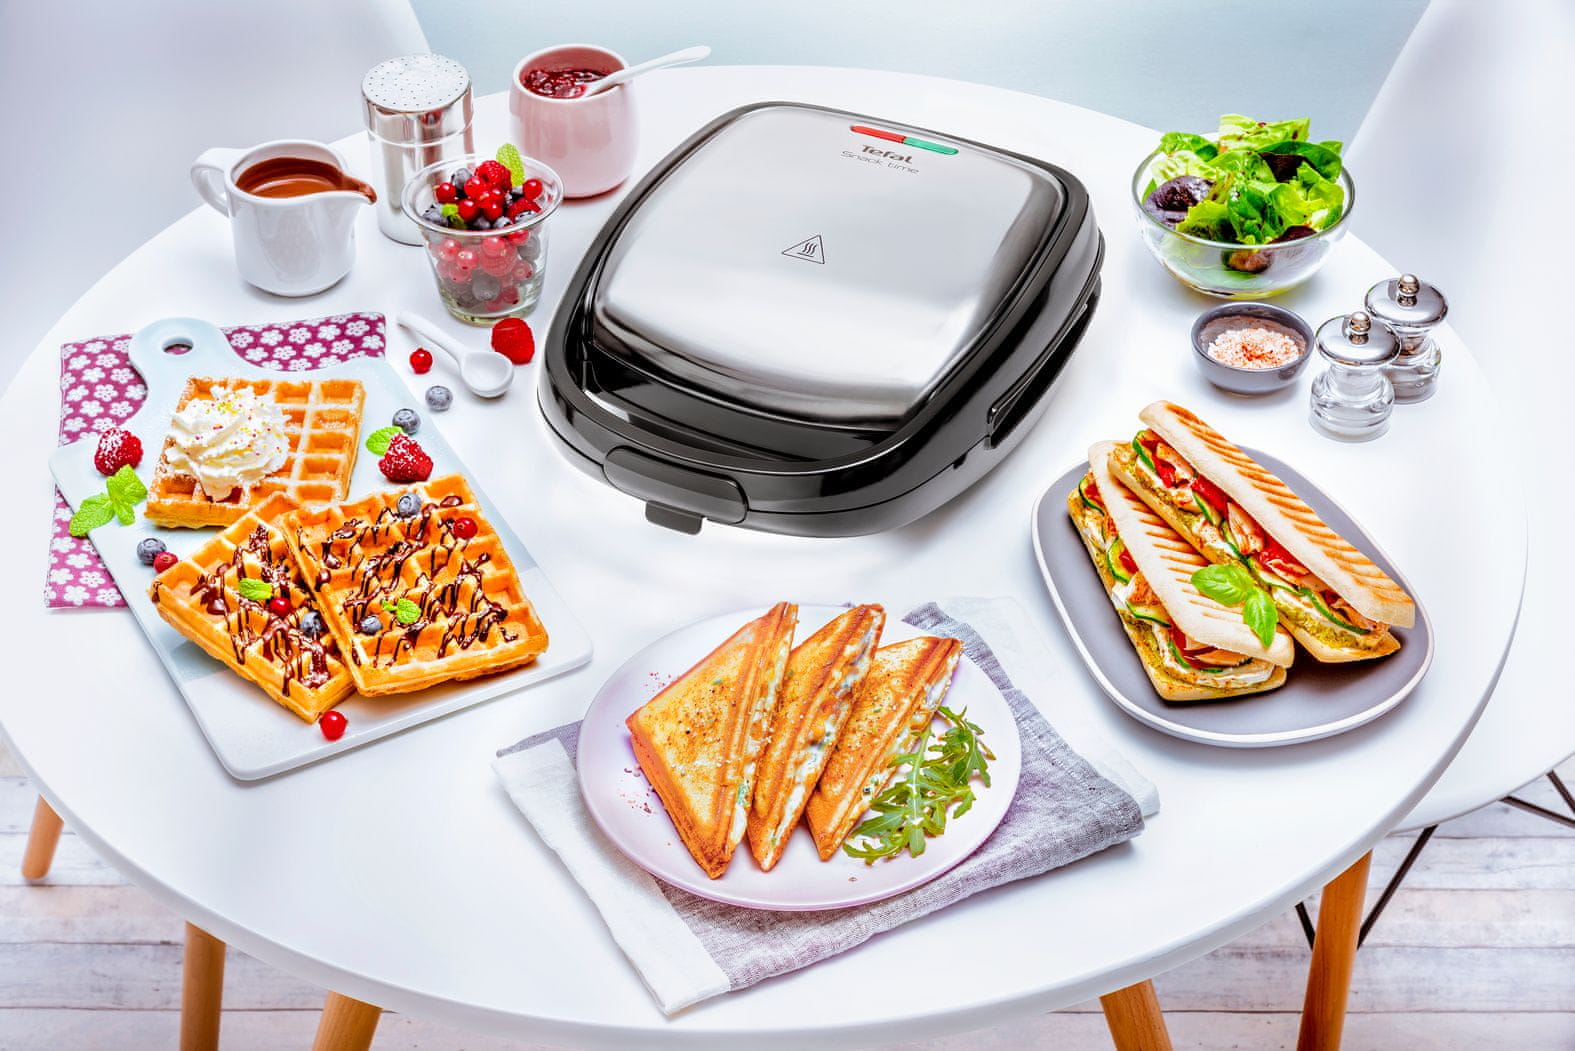  Tefal SW341D12 Snack Time 2 in 1 